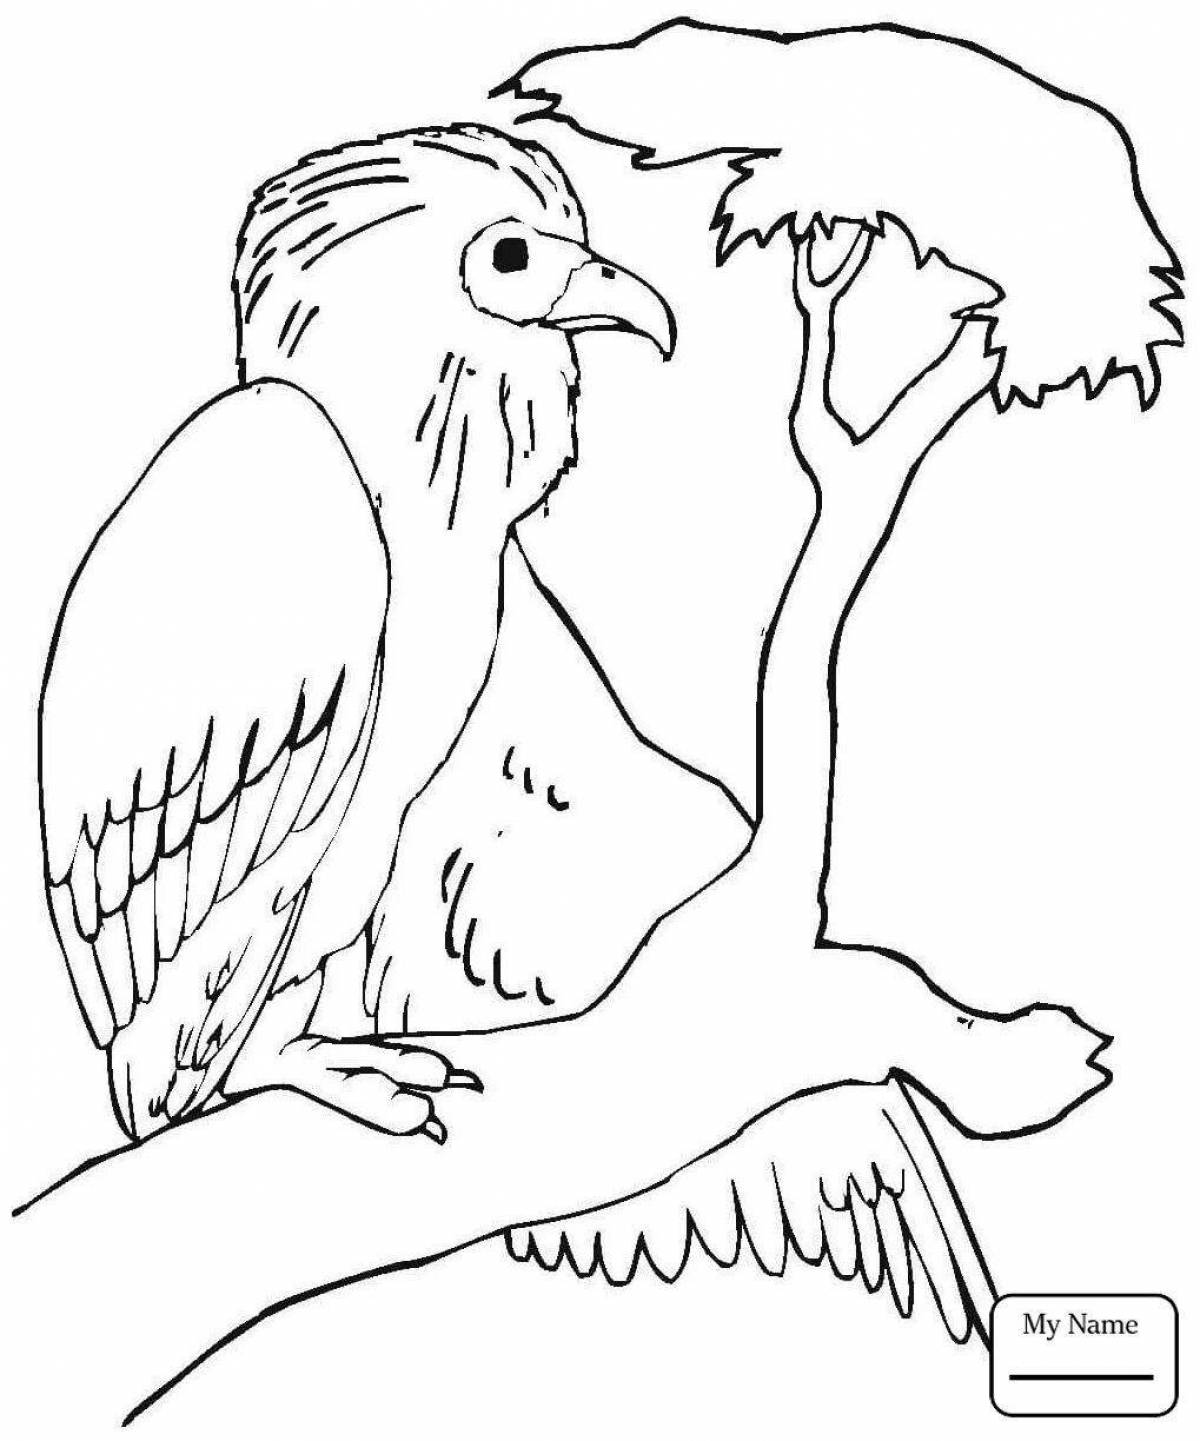 Coloring page spectacular vulture